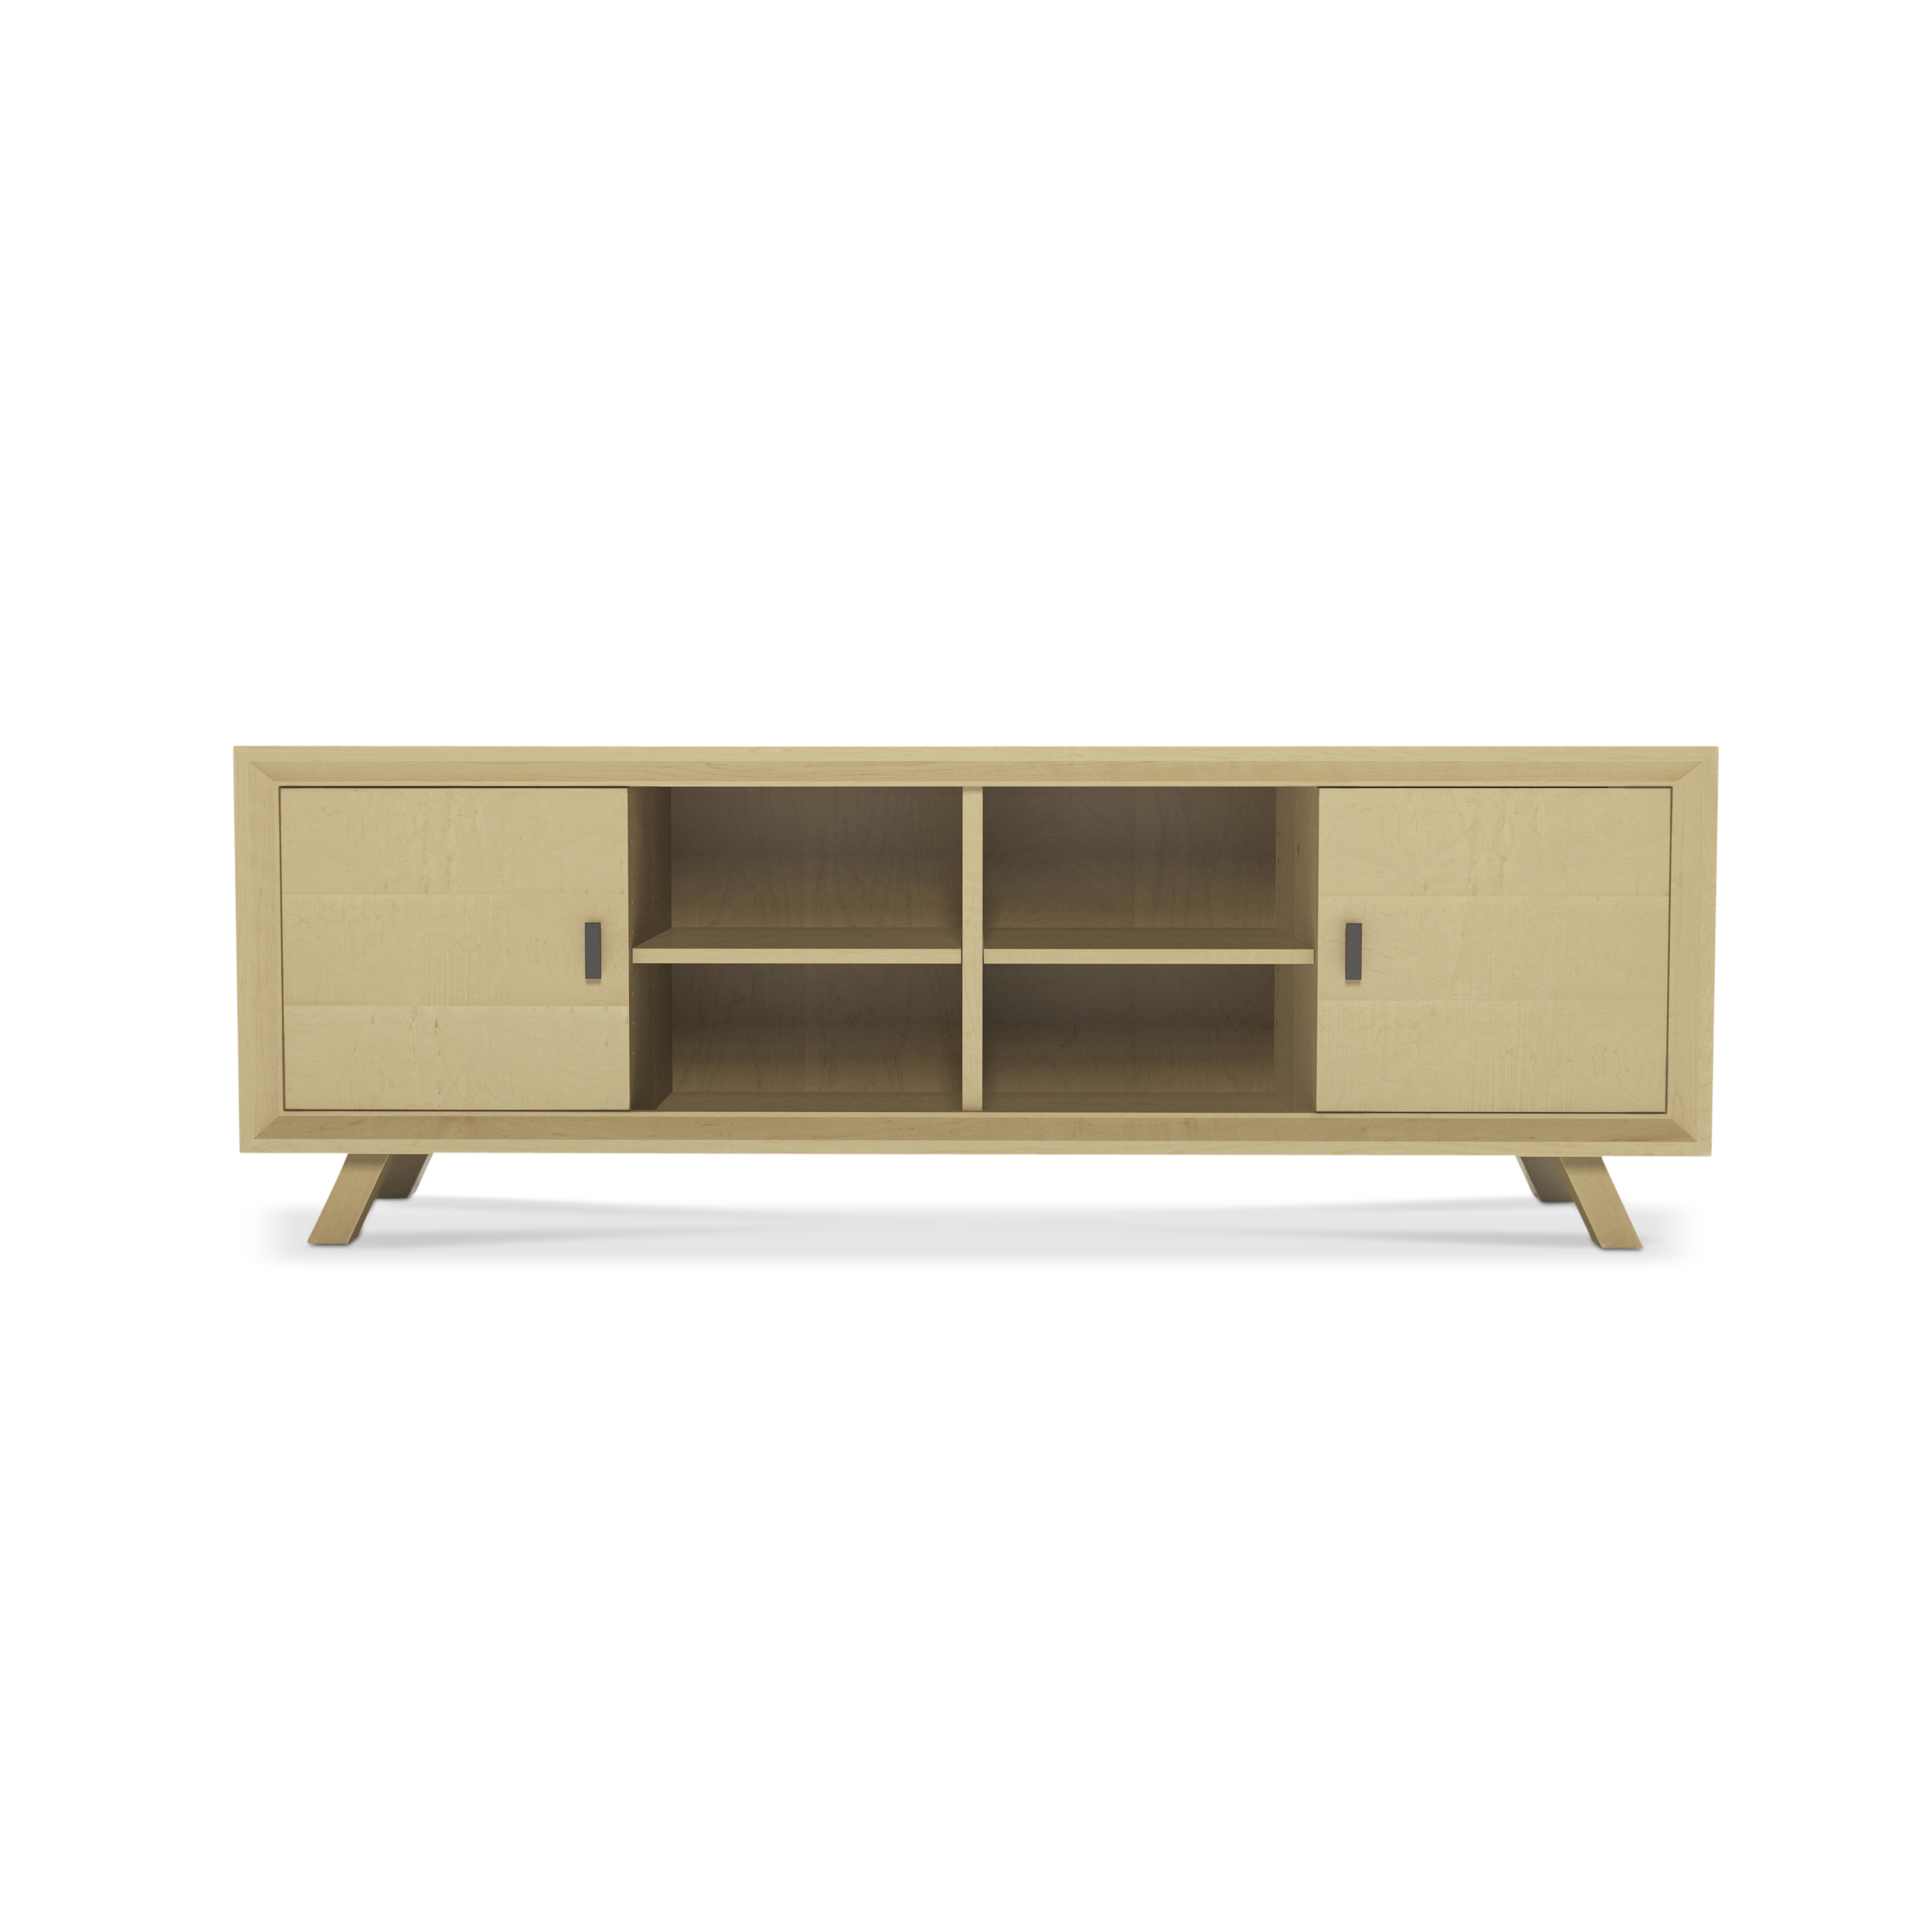 Series 555 Media Cabinet With Two Doors At 72″ In Width